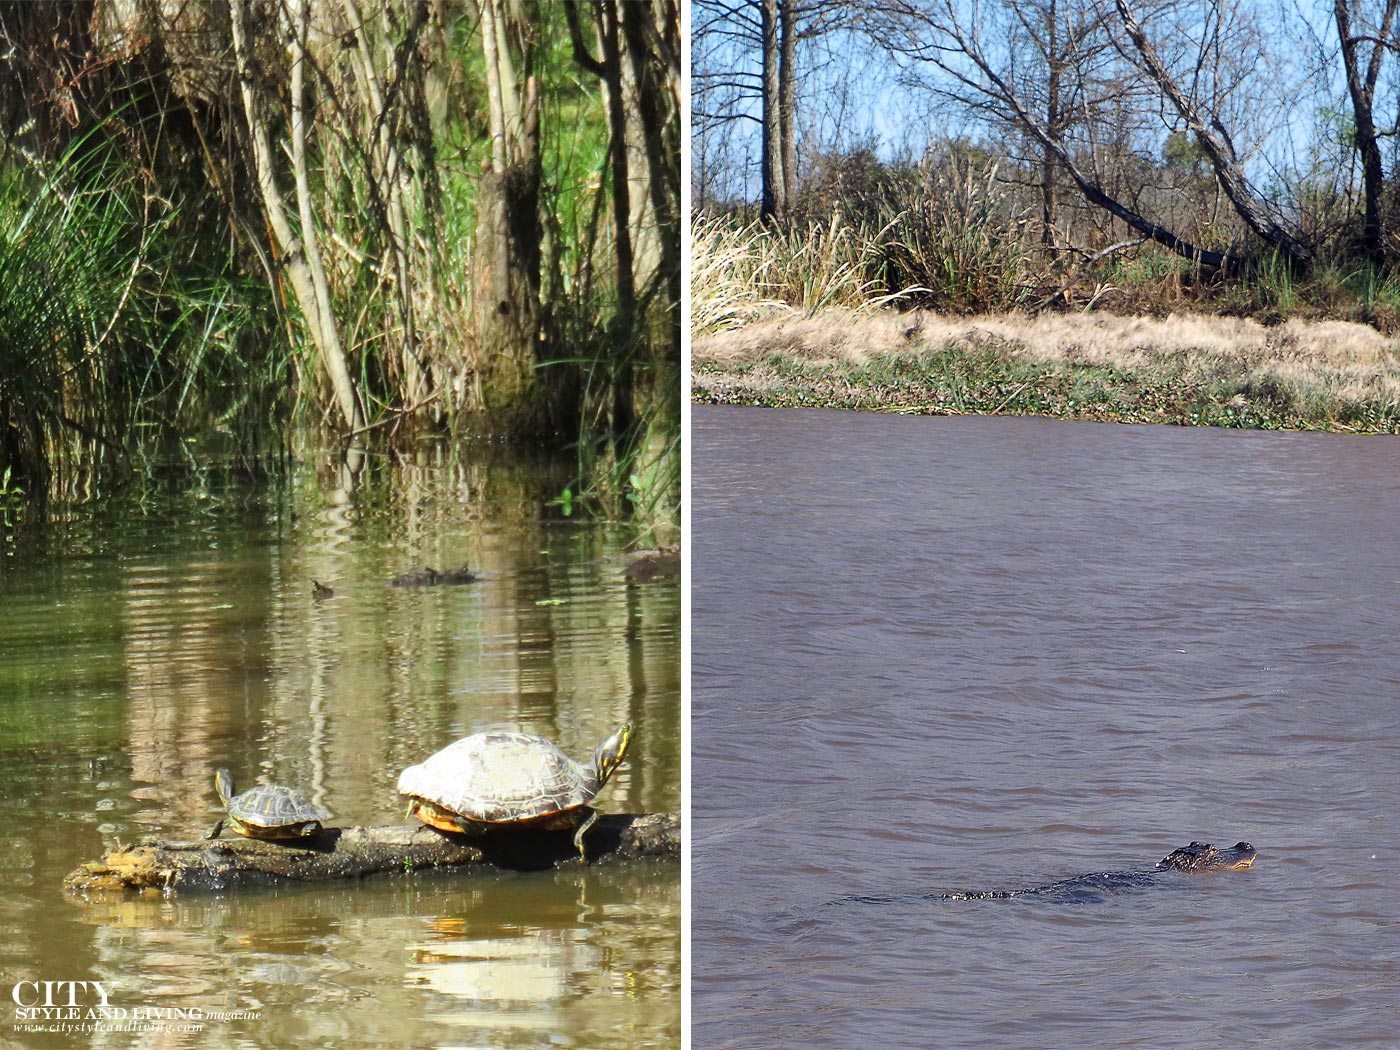 City Style and Living Magazine Honey Swamp alligator and turtle in water